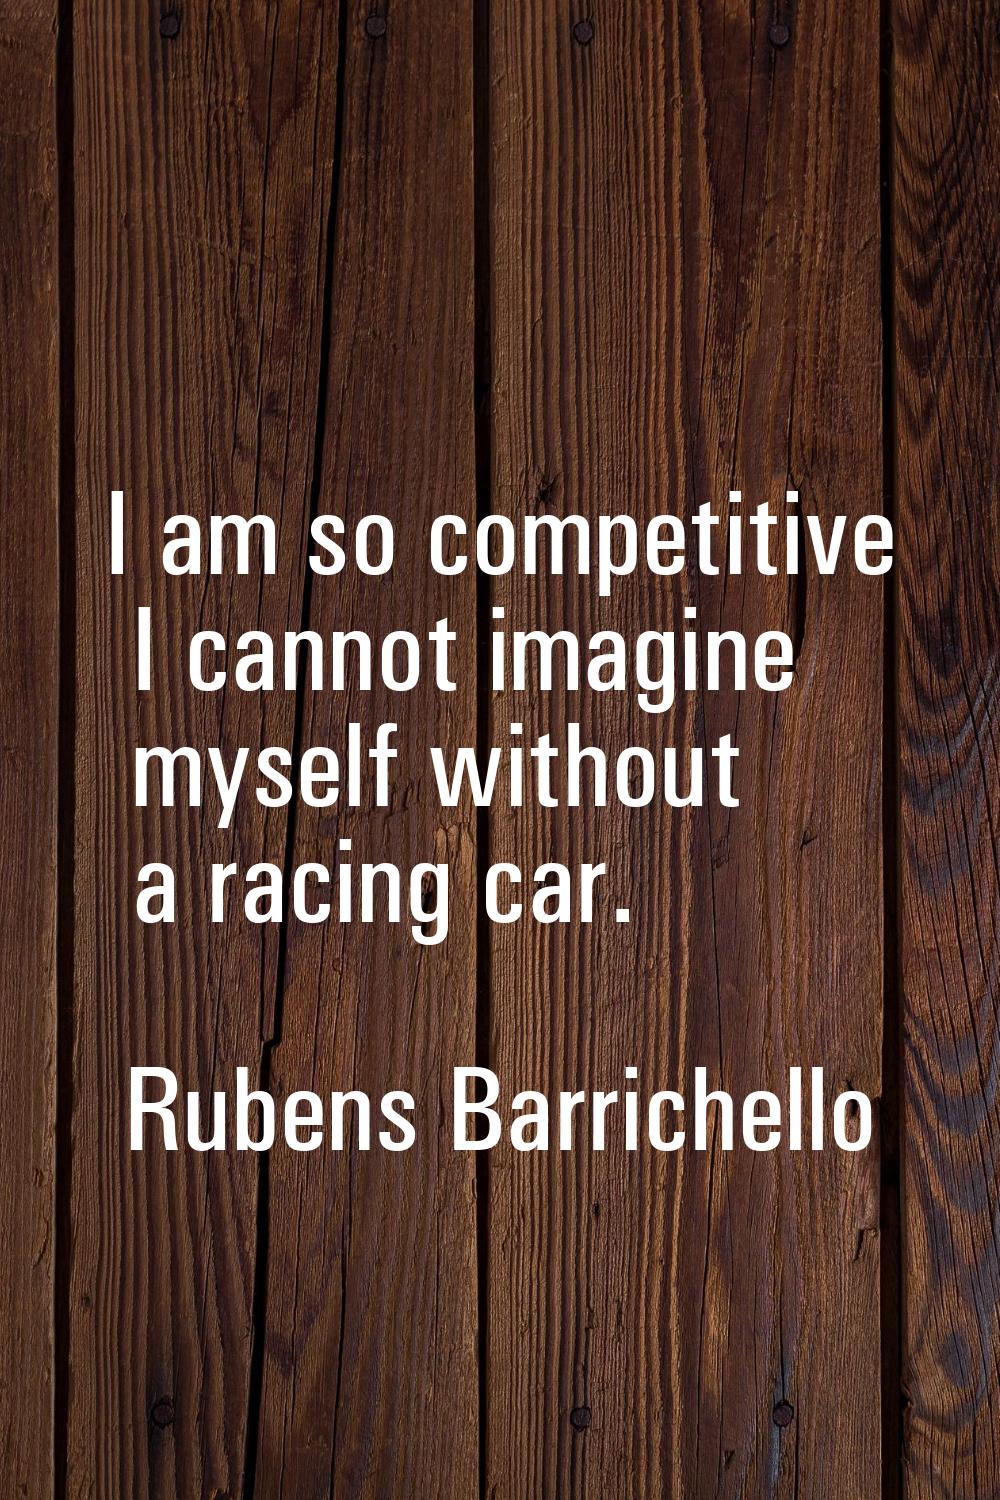 I am so competitive I cannot imagine myself without a racing car.